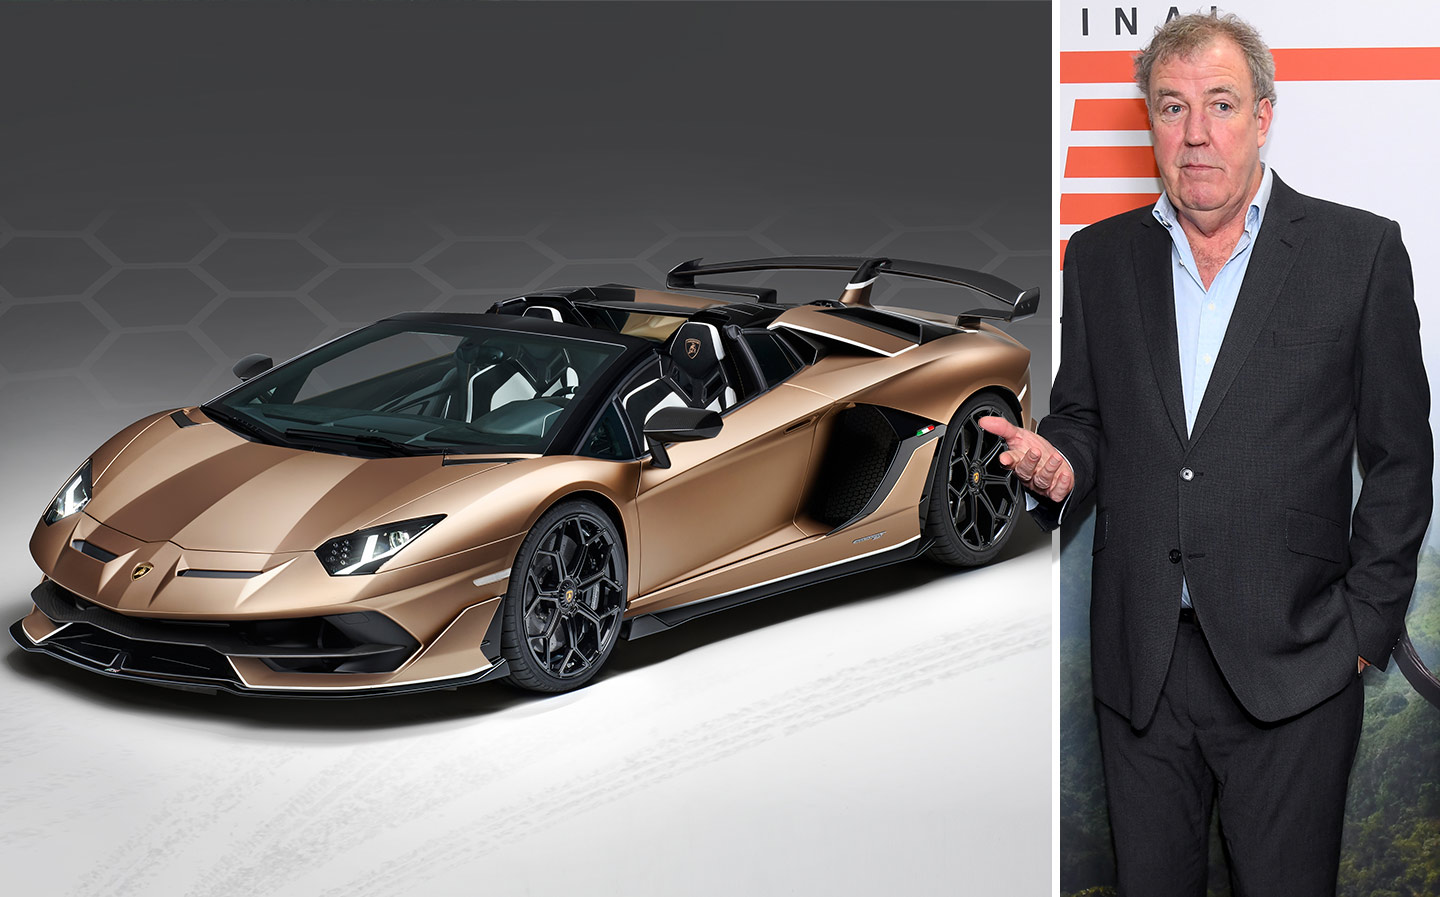 Jeremy Clarkson: The Lamborghini Aventador SVJ is riddled with problems ... just as a supercar should be